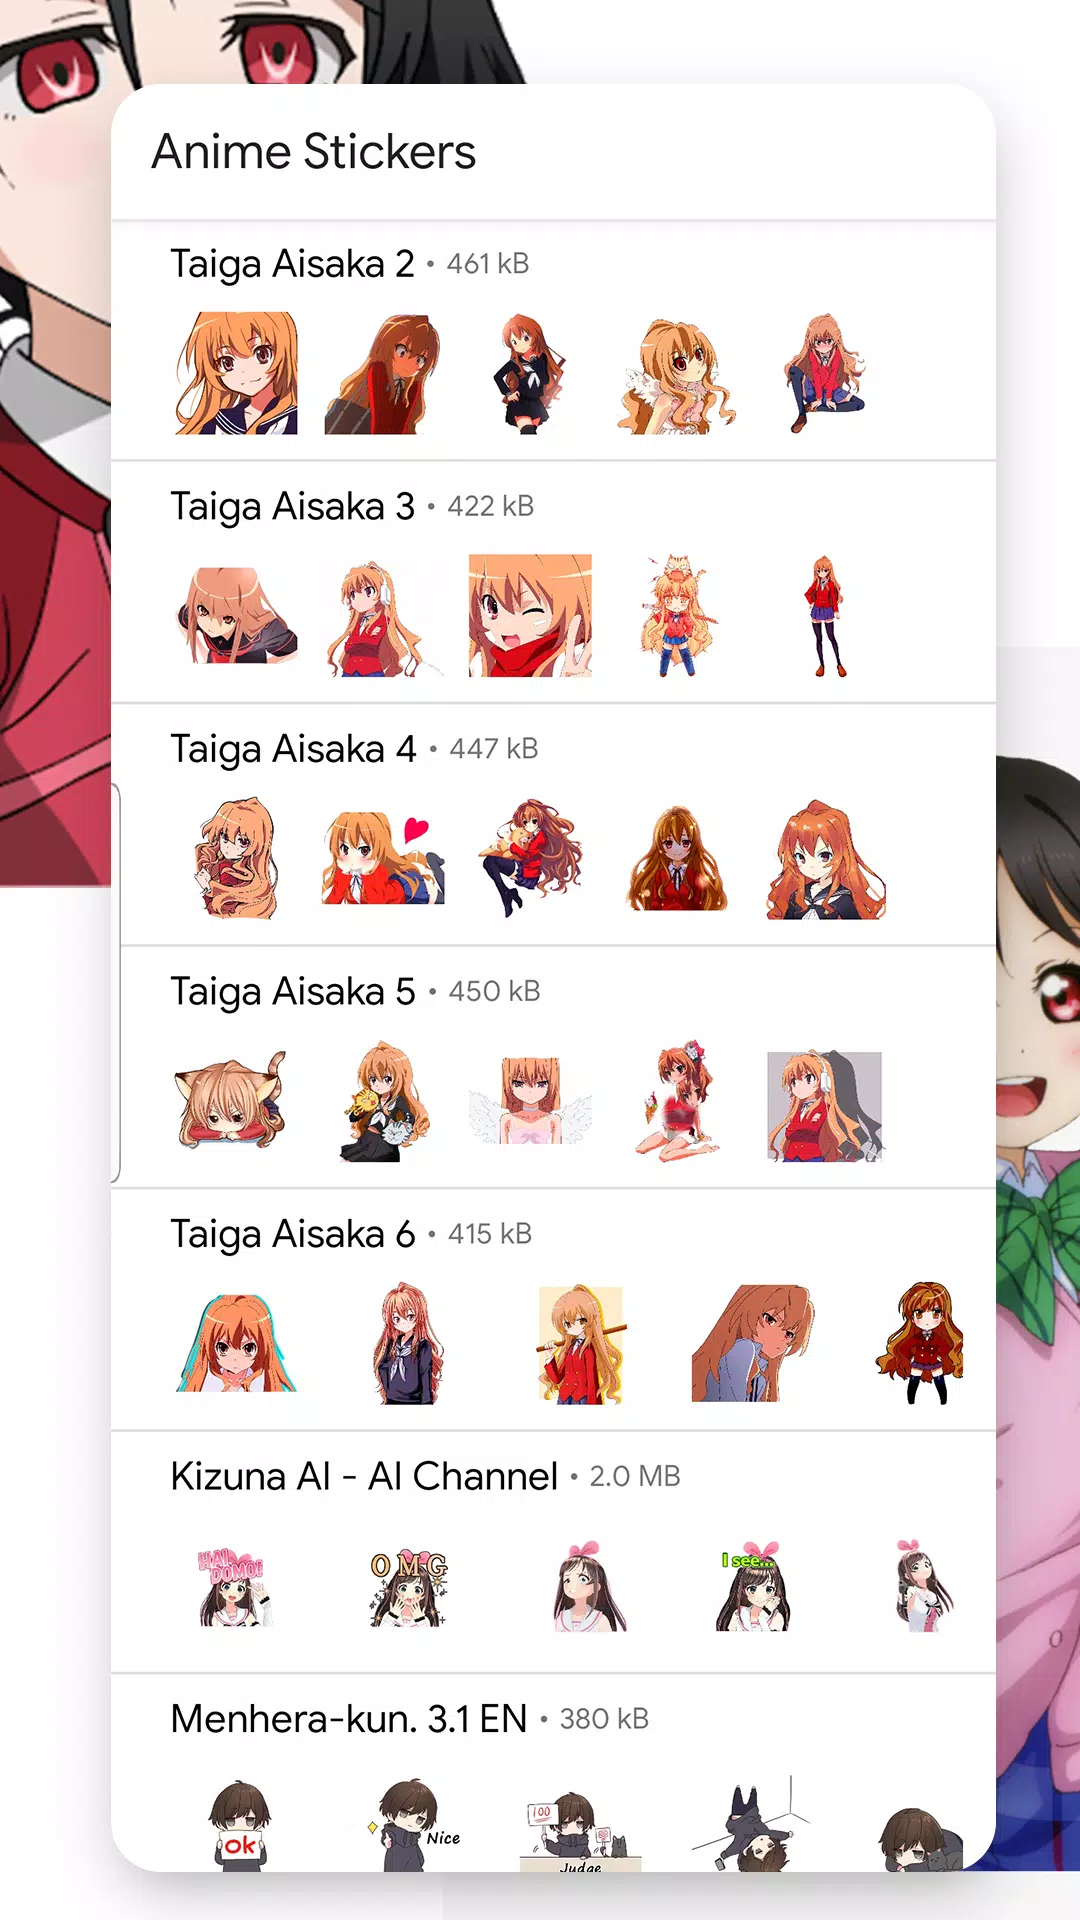 Stickers de Animes para WhatsApp - WAStickerApps Apk Download for Android-  Latest version 1.1- com.mystickersanime